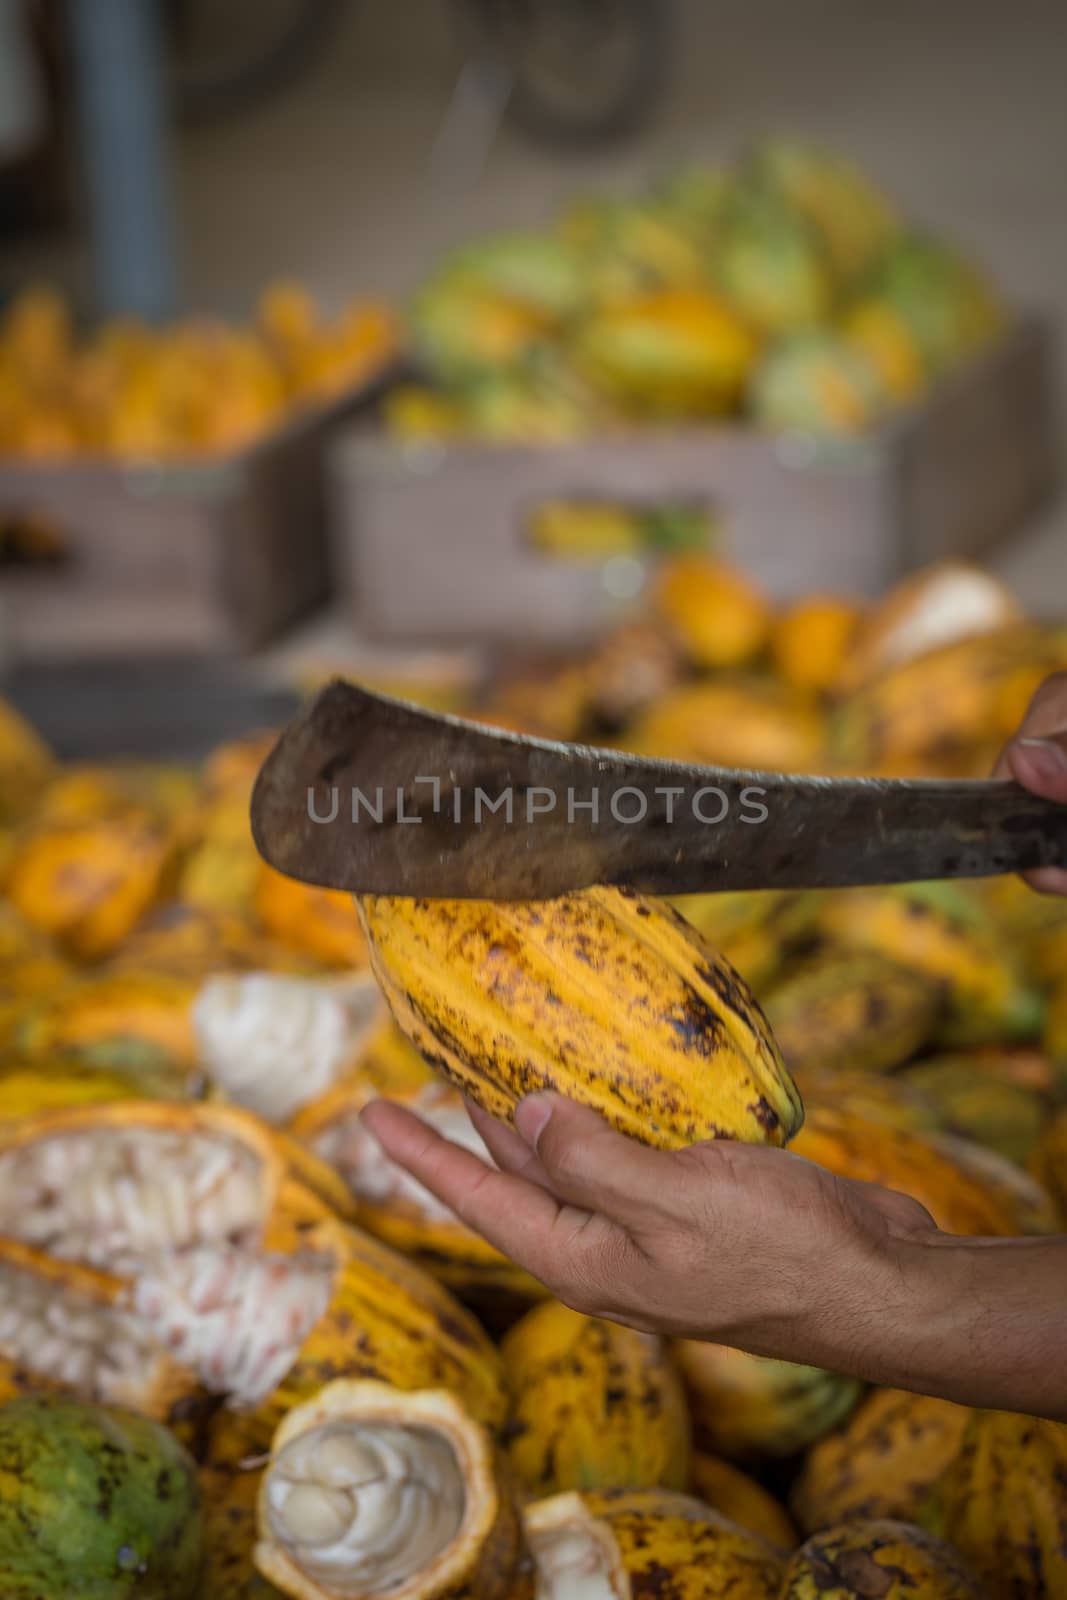 Cacao pod cut open to show cacao beans inside in Thailand by kaiskynet